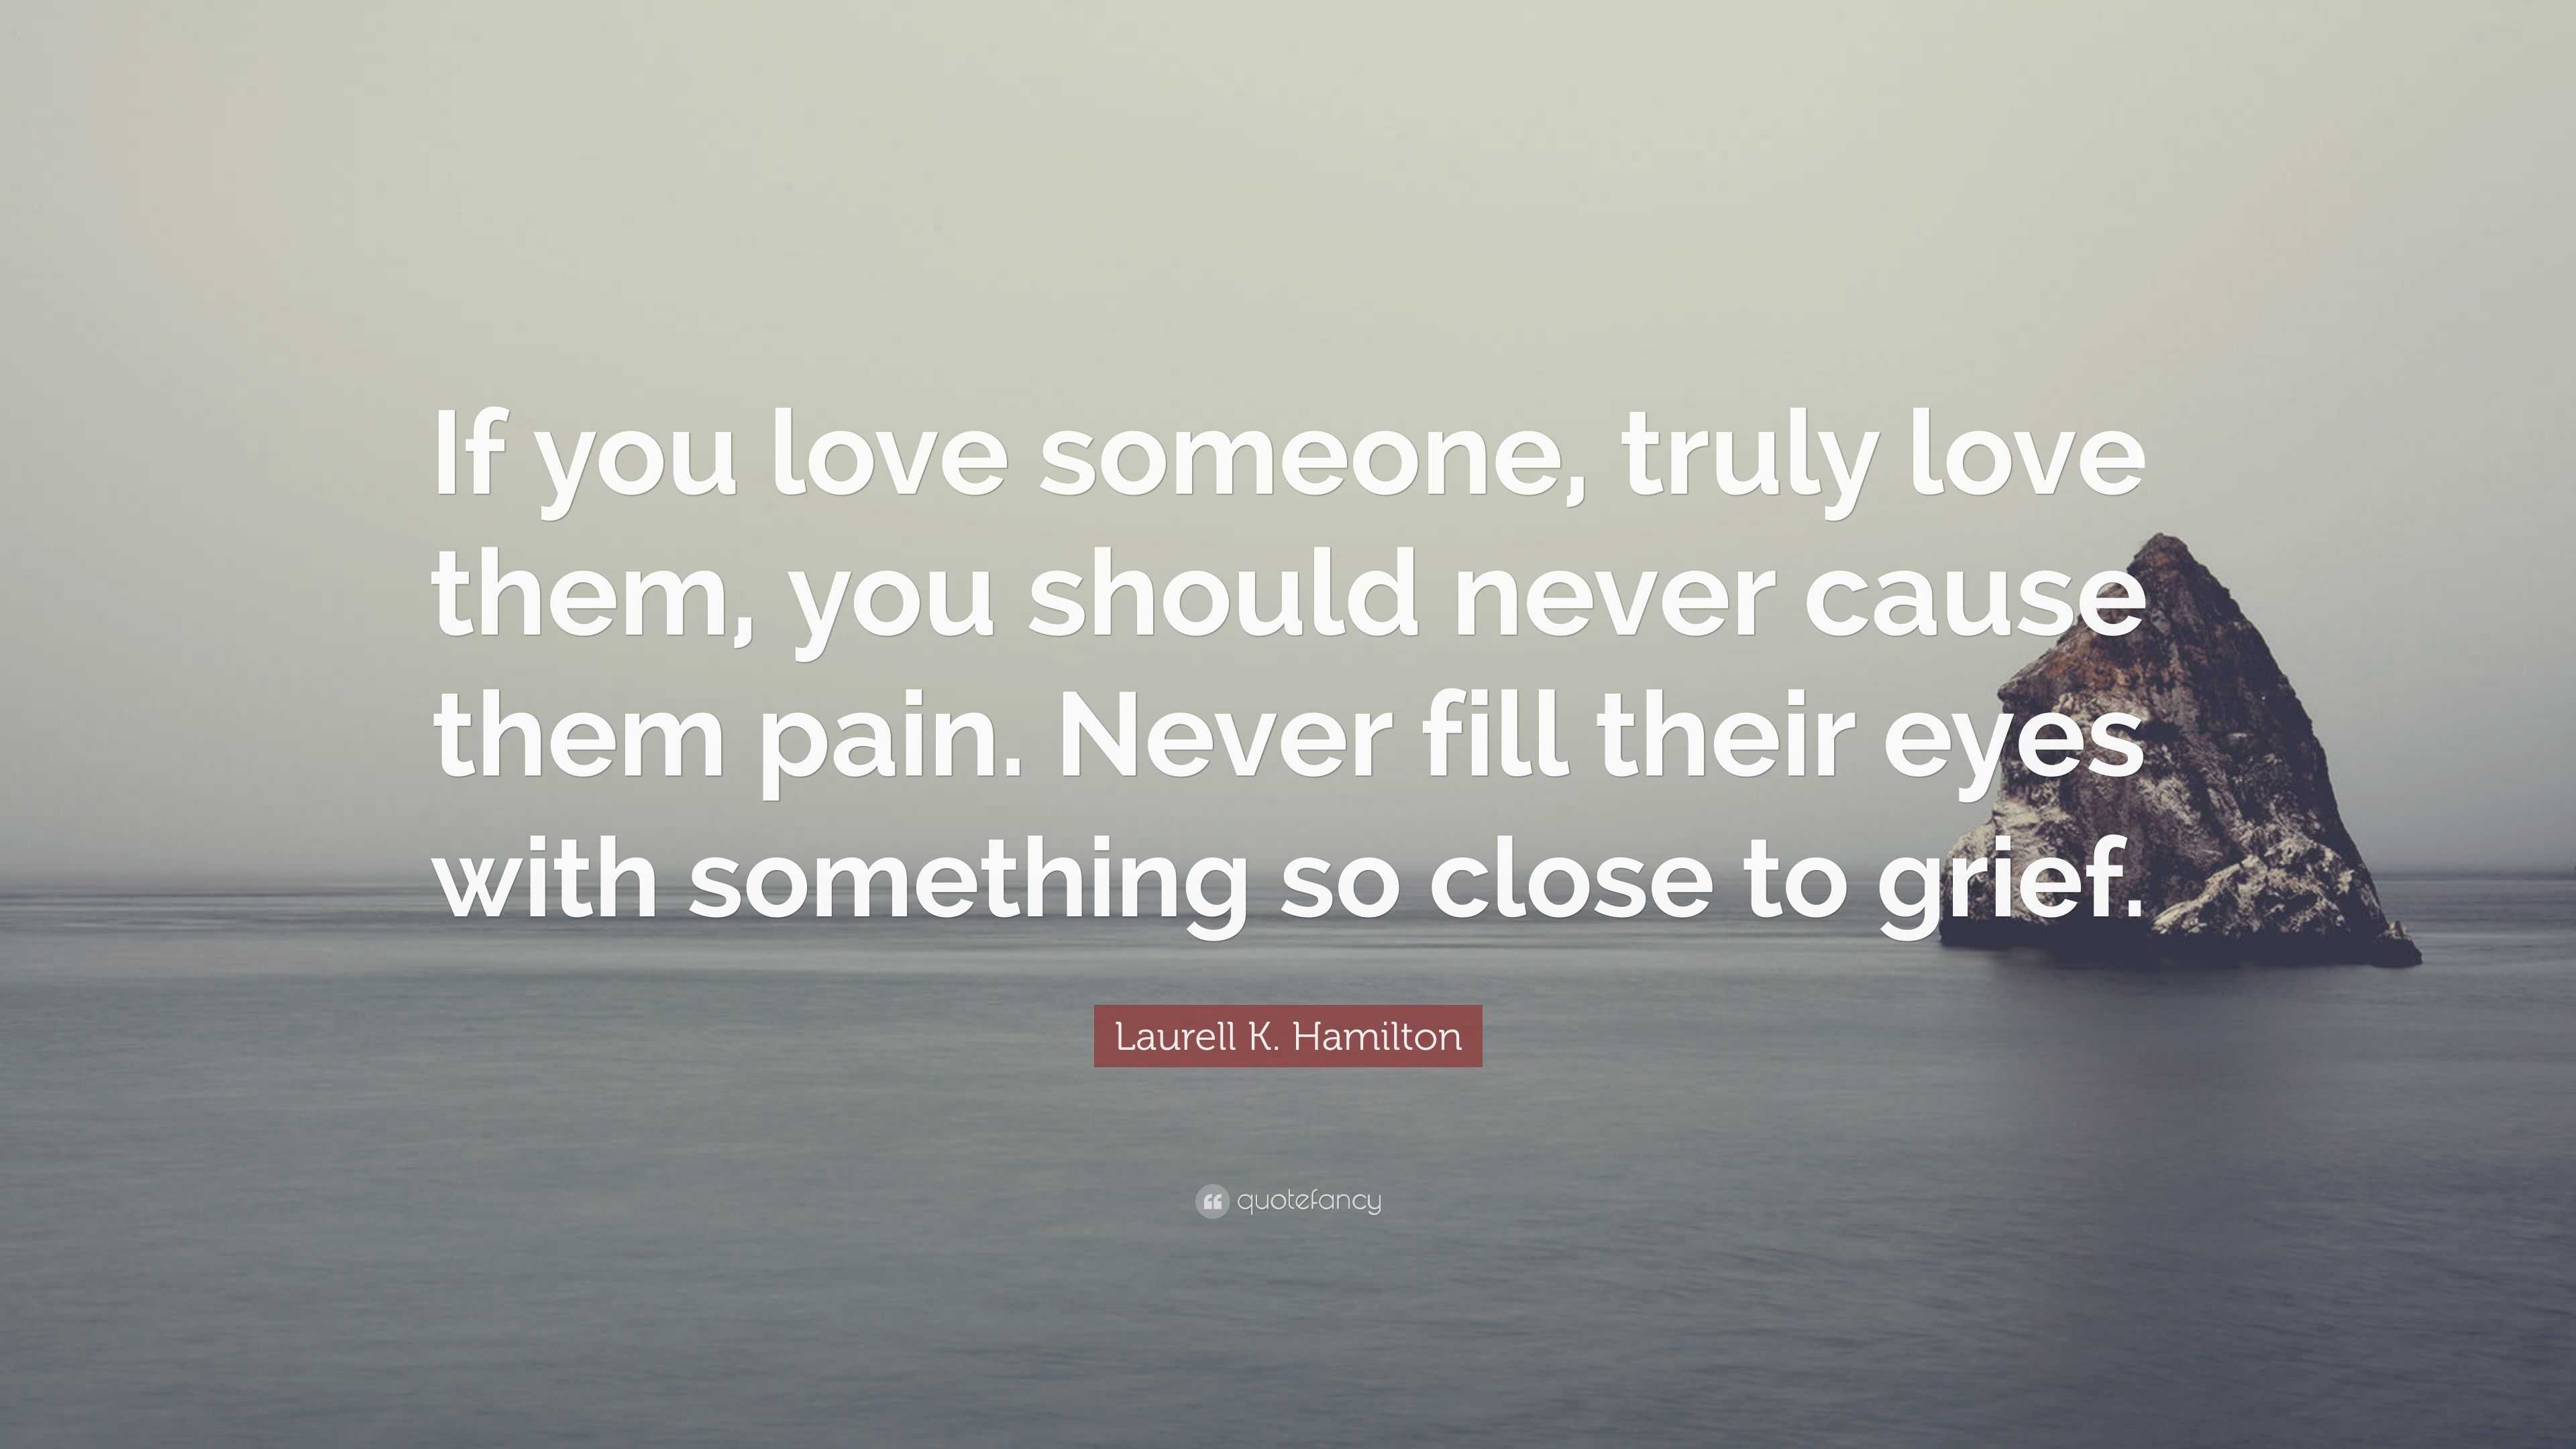 Laurell K Hamilton Quote “If you love someone truly love them